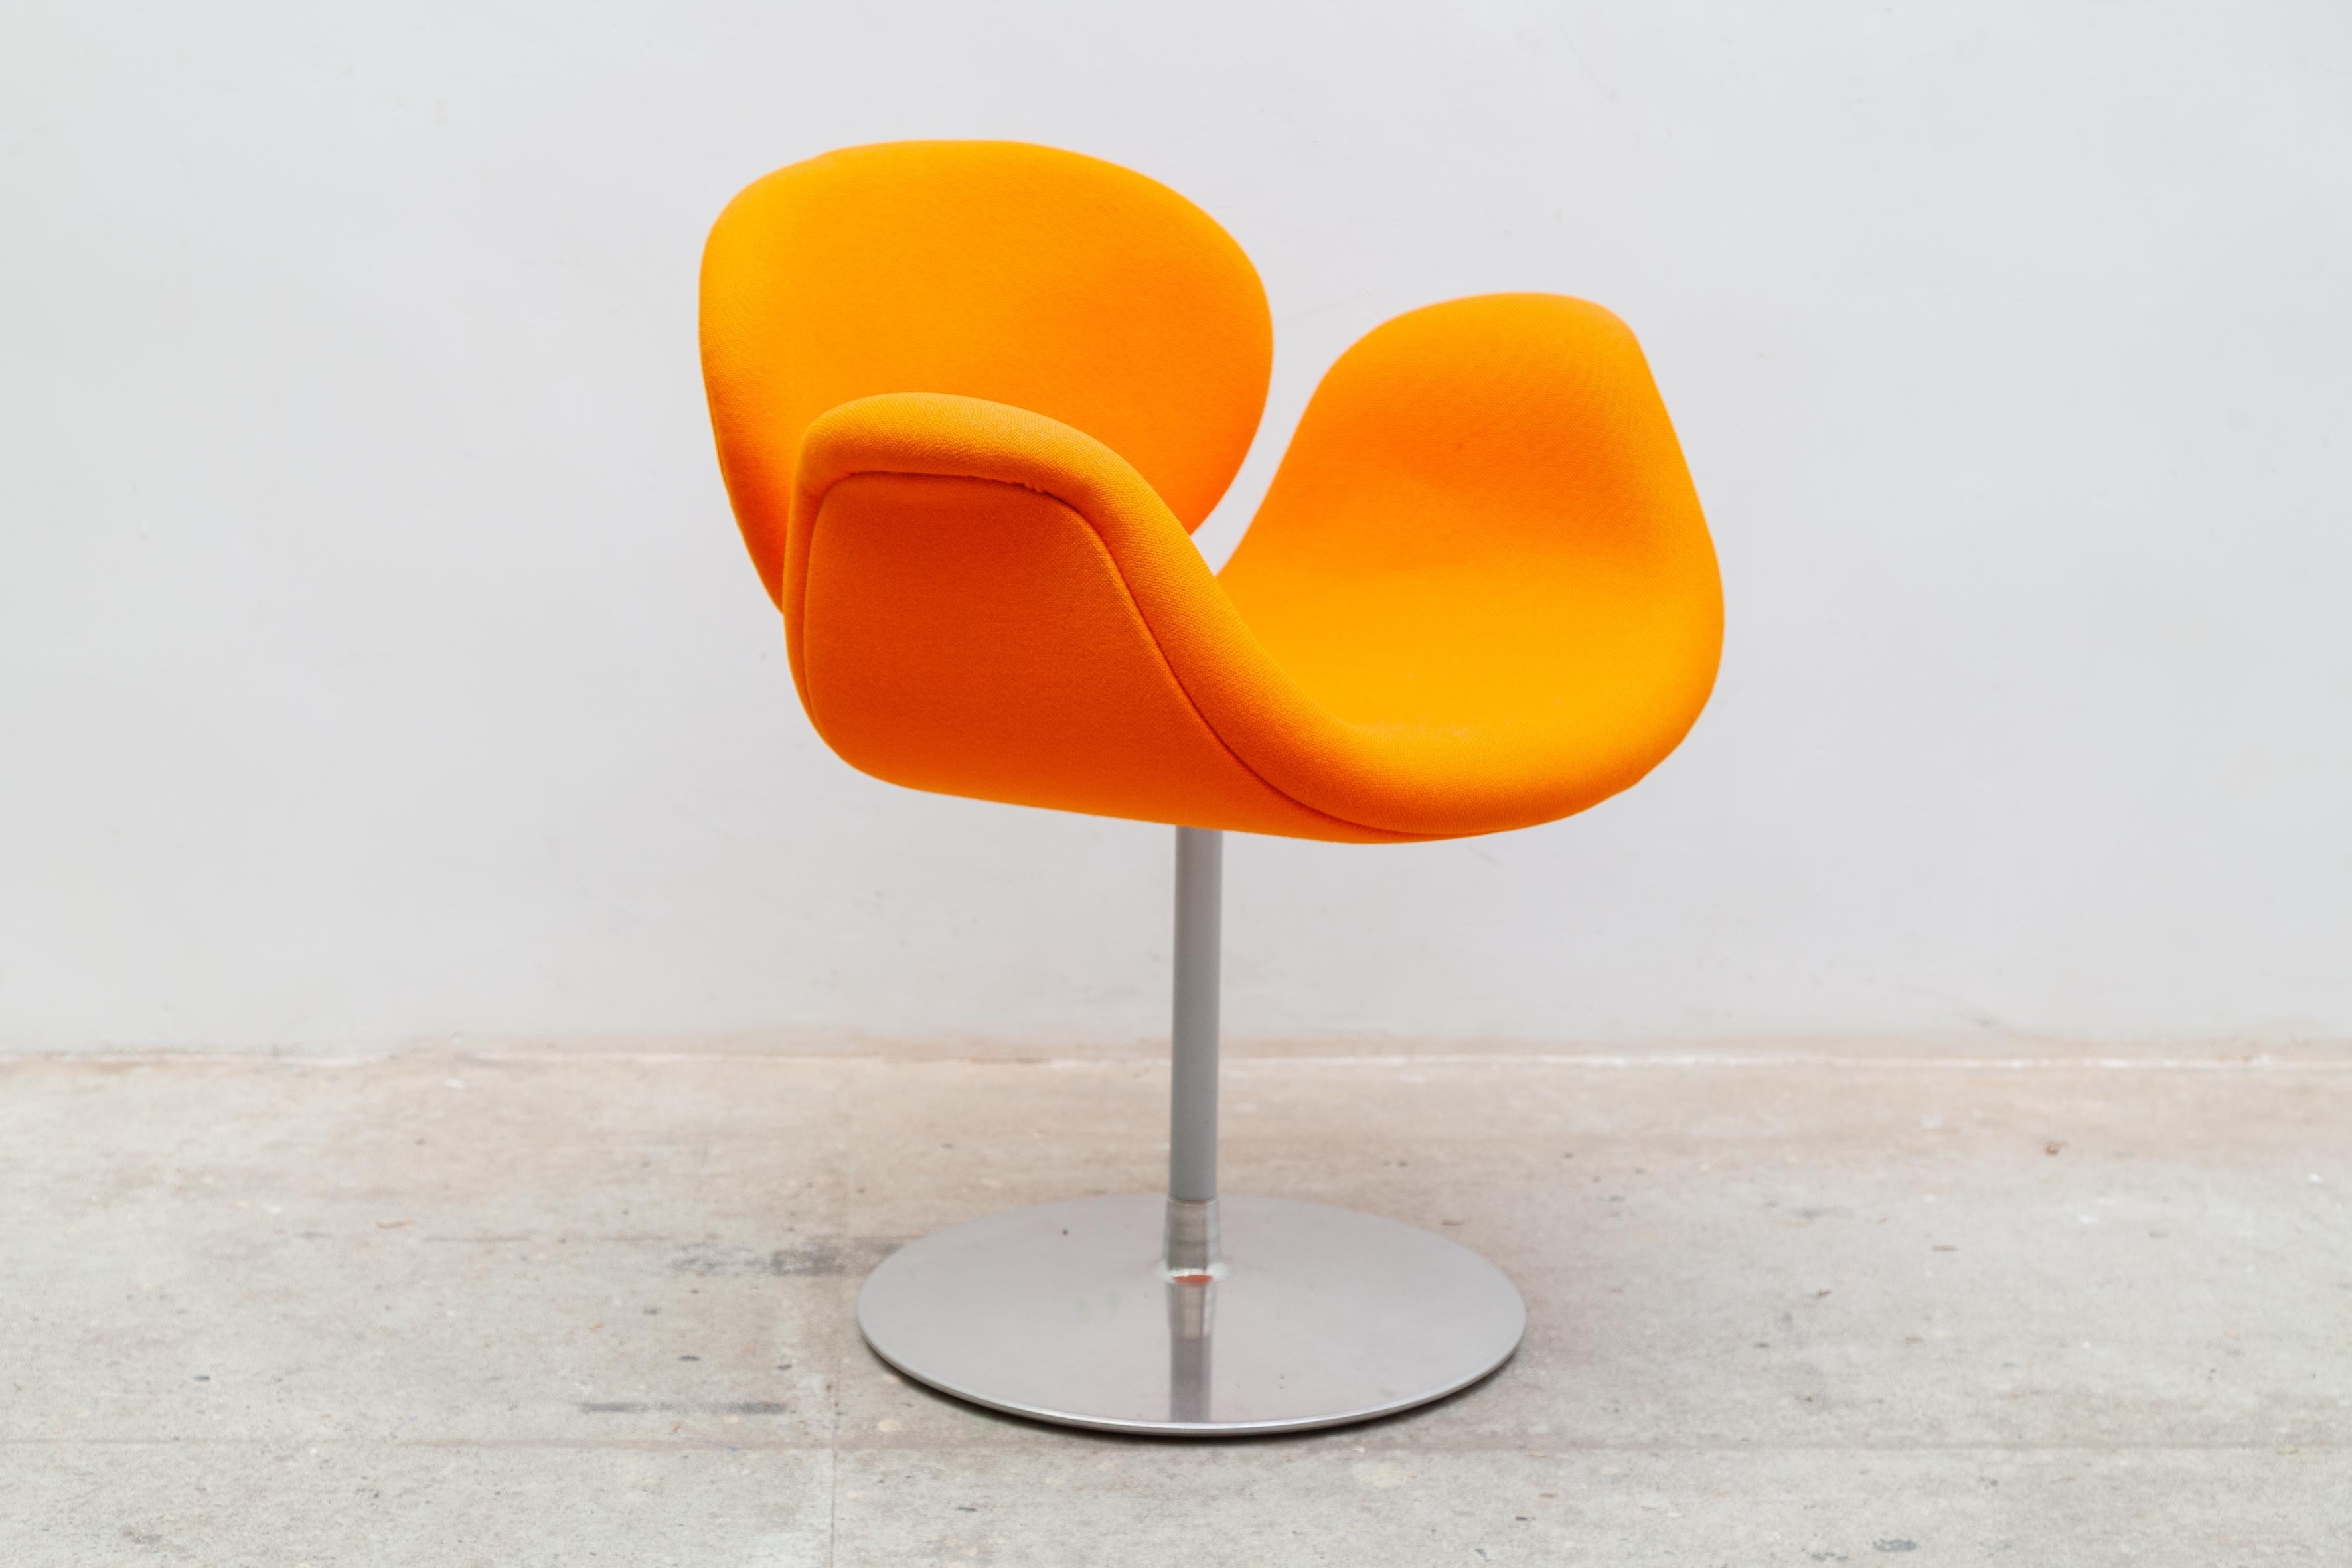 Great Luxury swivel chairs of Pierre Paulin. the Tulip chair has an inviting appearance for a relaxed sitting with a nice intens orange in original condition.
The Artifort Tulip lounge chair was designed by Pierre Paulin with a chrome base.